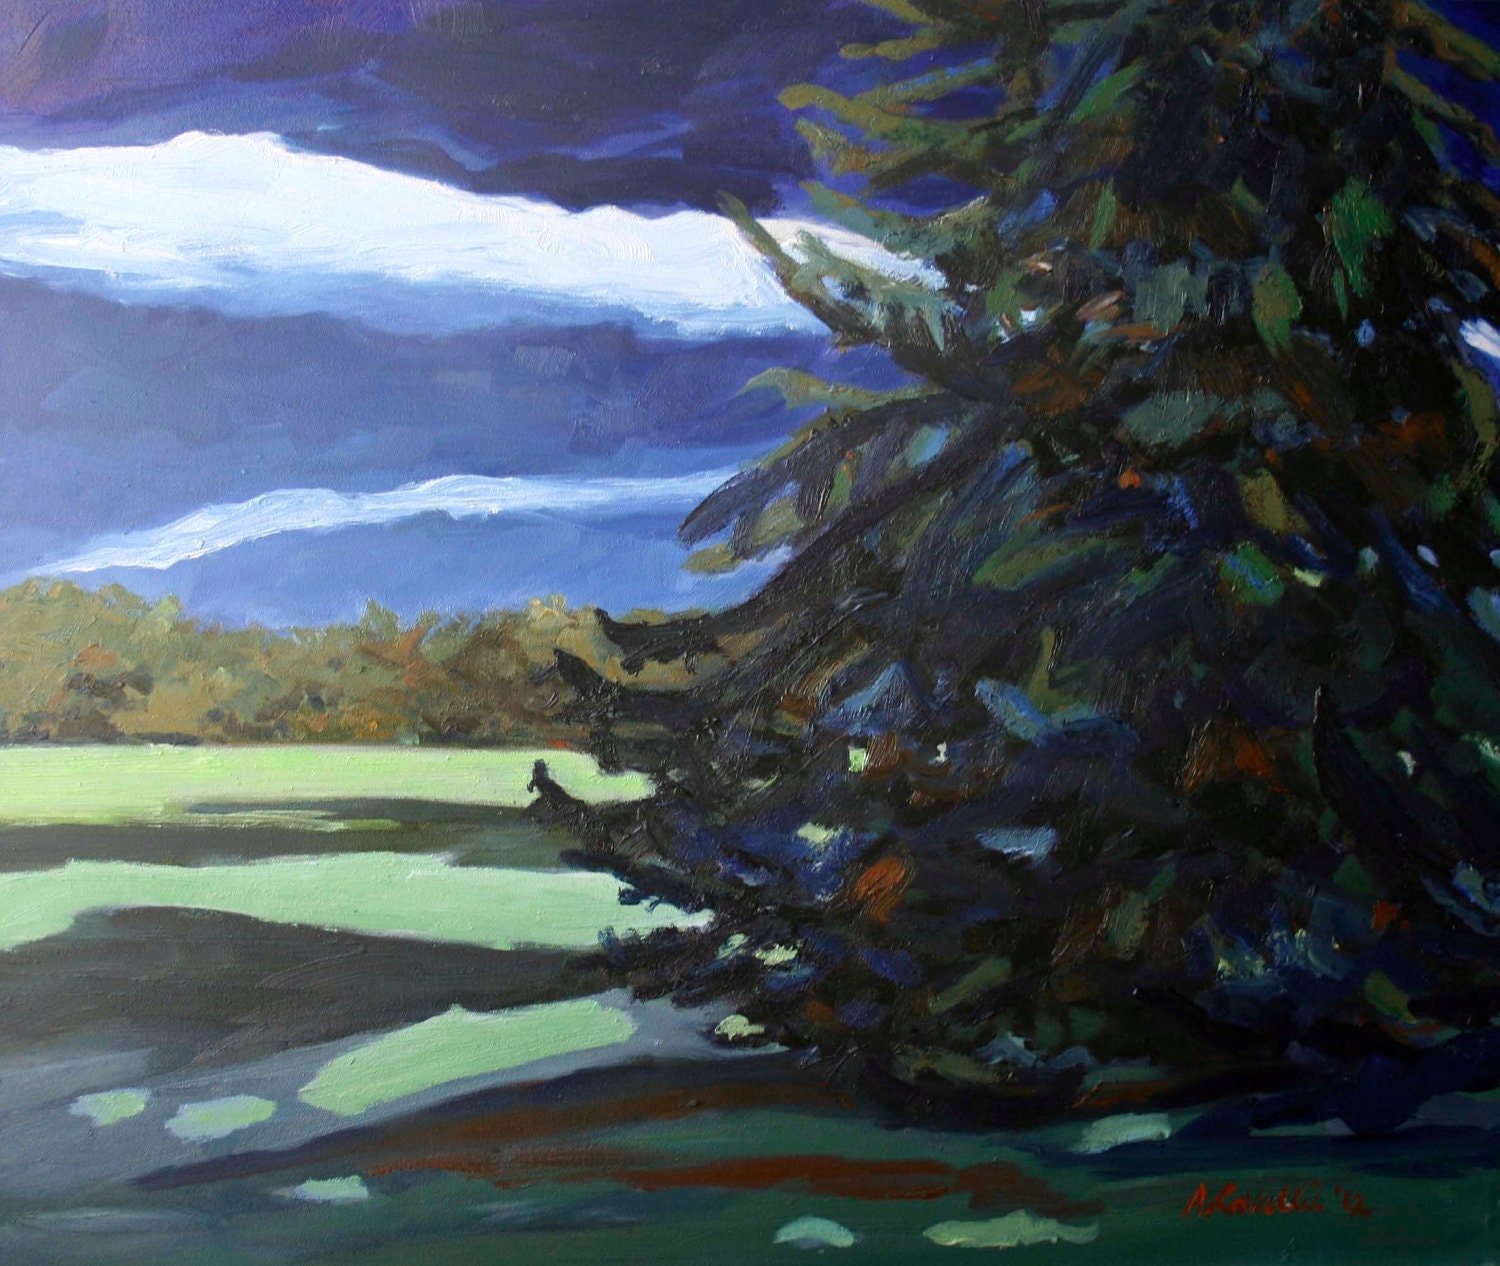 Landscape painting oils Blue Moon  MOONLIGHT Shadows abstract Spruce trees stretched Canvas Original Fine Art